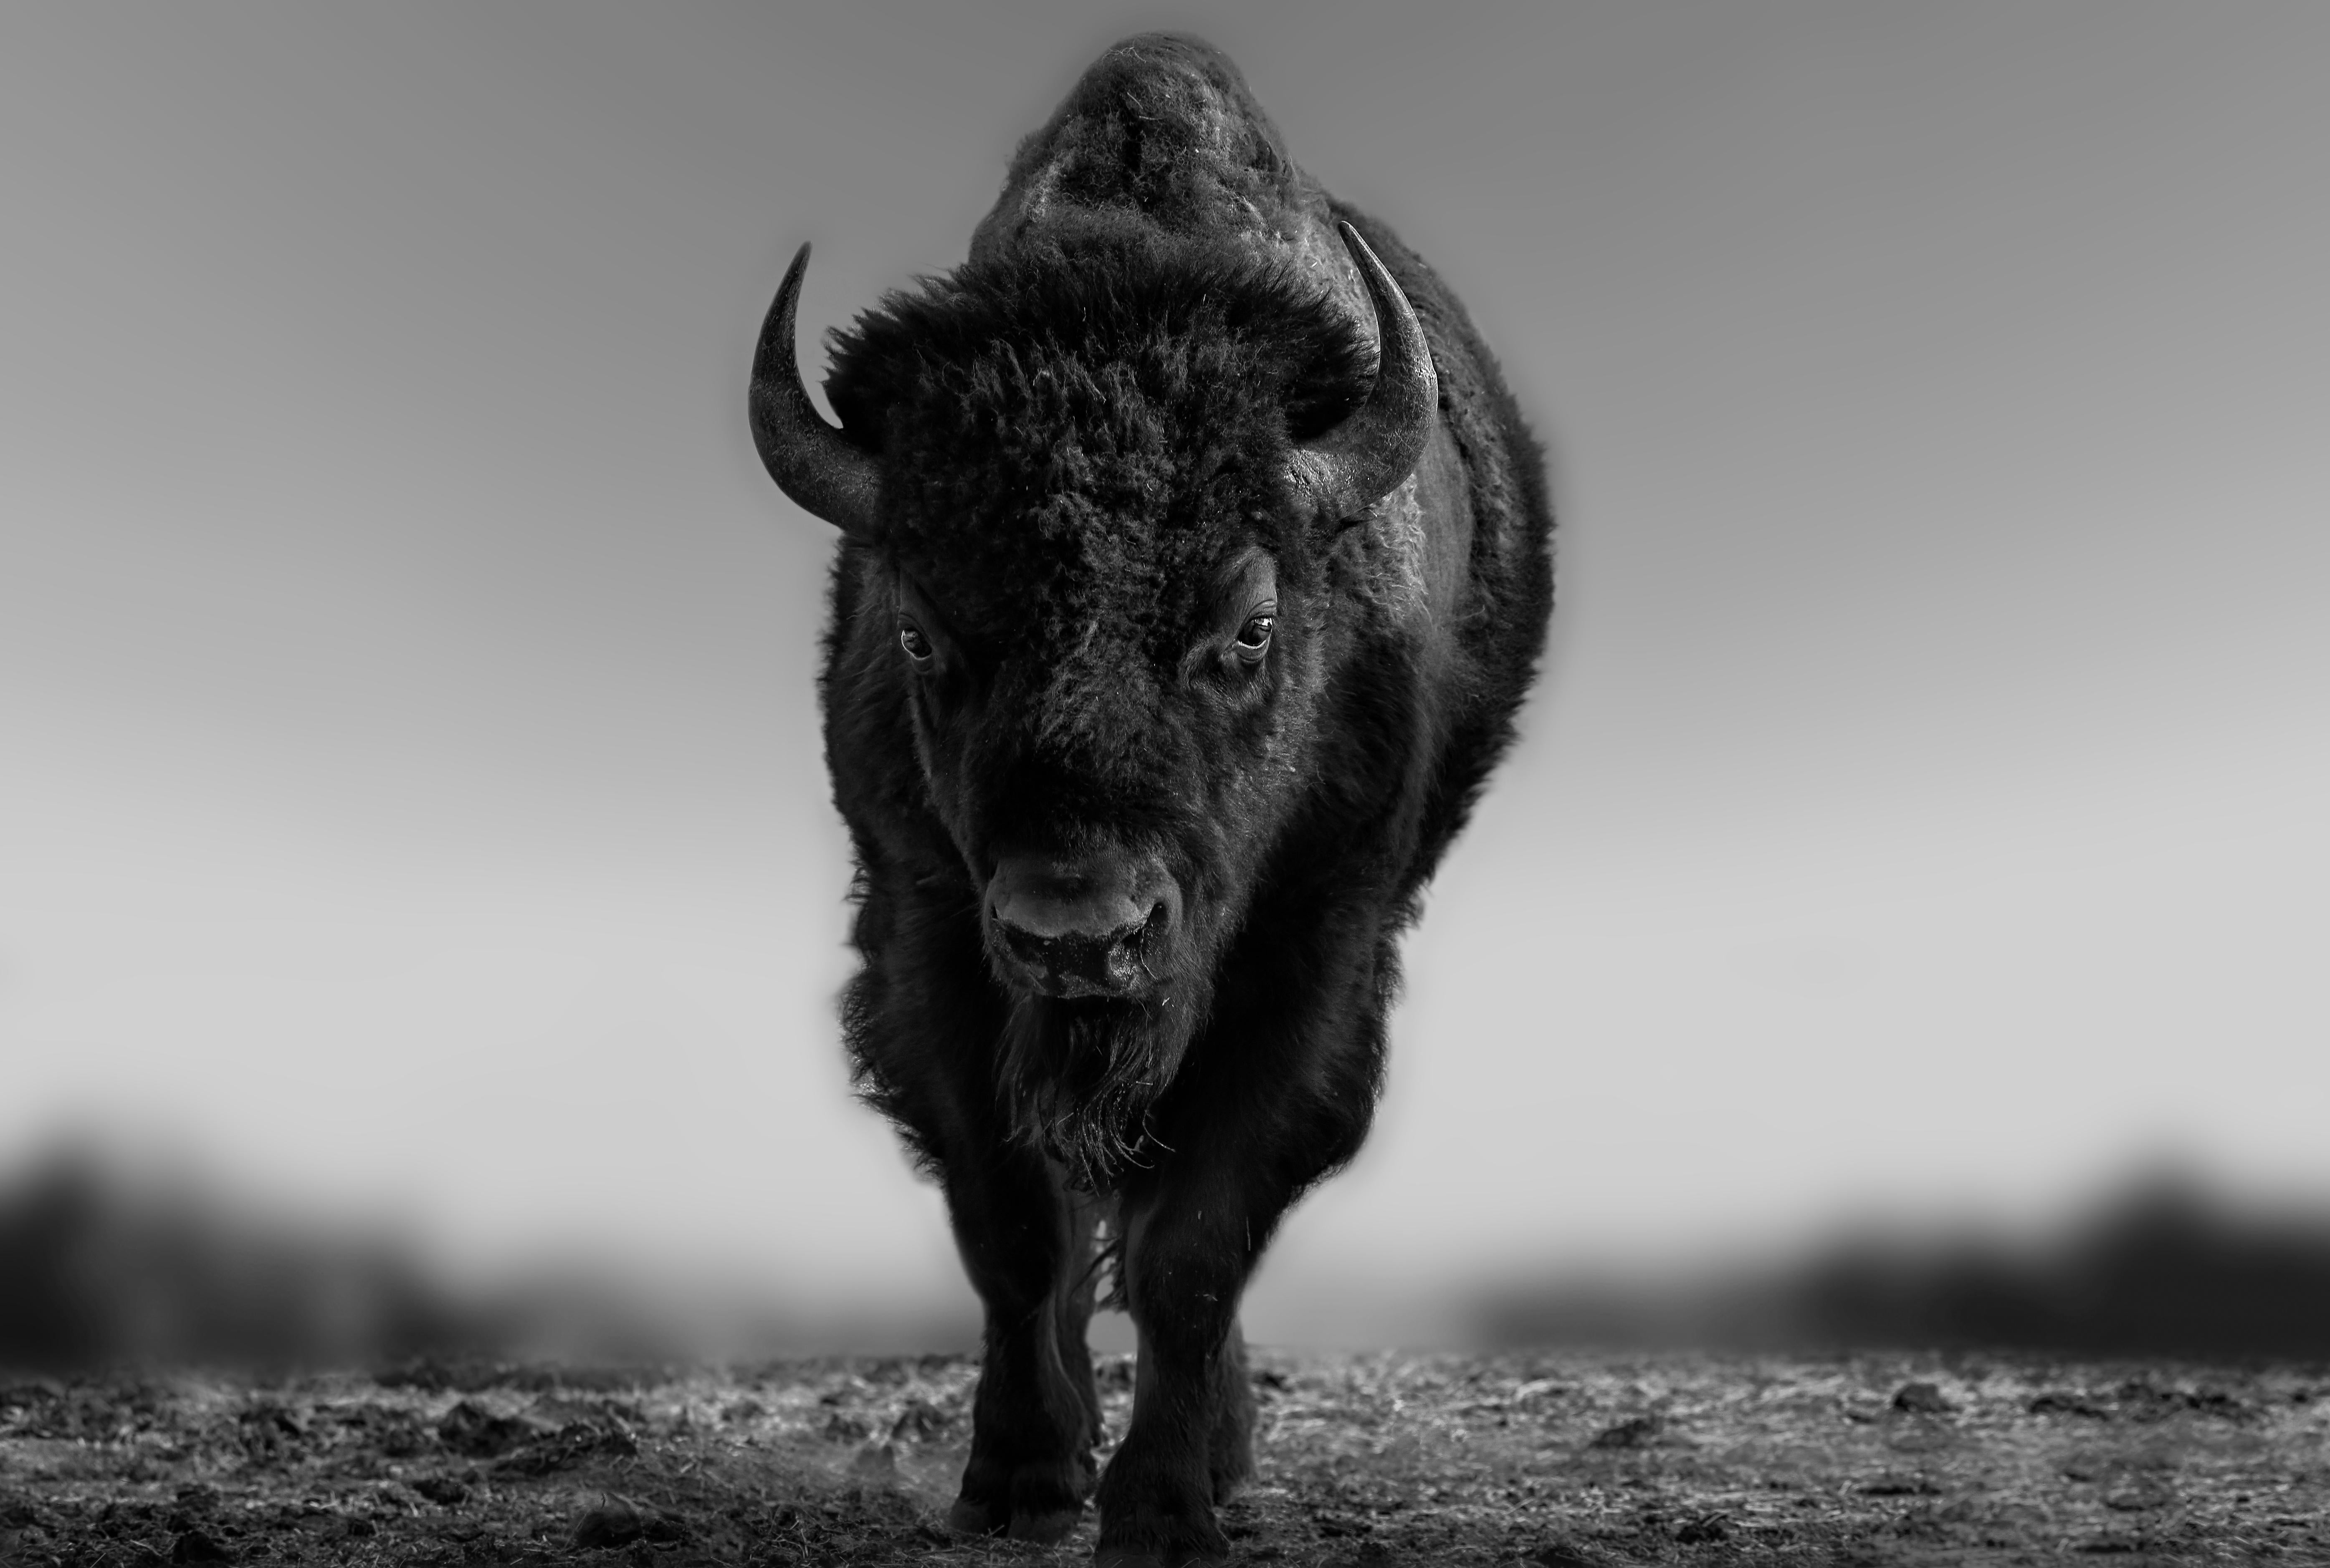 Shane Russeck Animal Print - "The Beast" 36x48 -Black & White Photograph of Bison Buffalo Unsigned Test Print